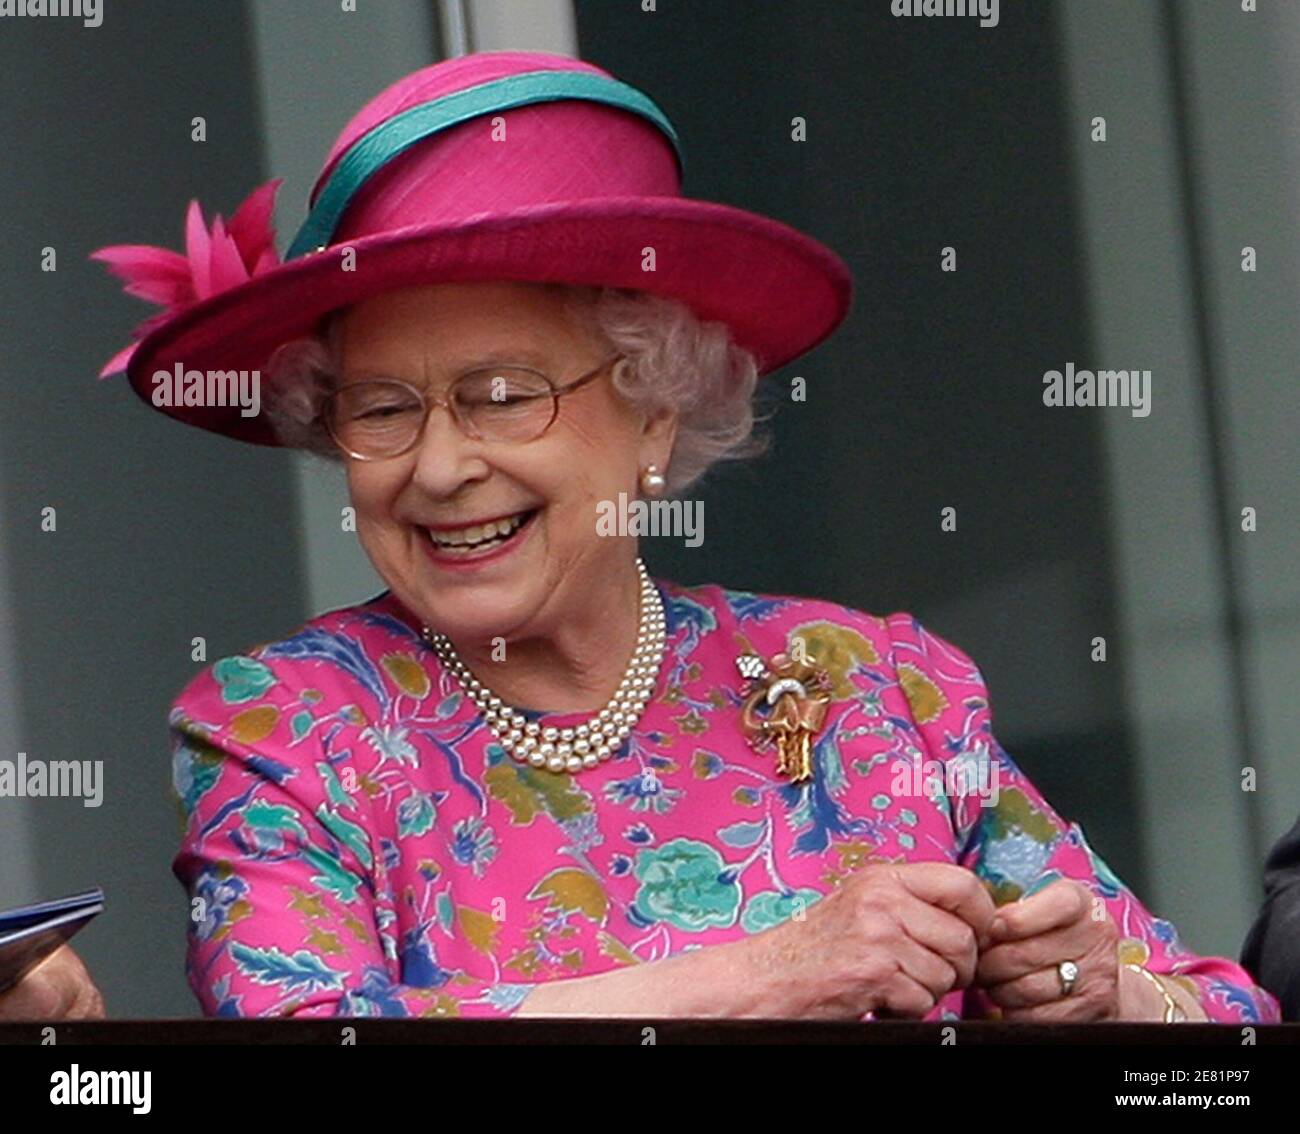 Britain's Queen Elizabeth watches during the Epsom Derby Festival at Epsom Downs in Surrey, southern England June 7, 2008.    REUTERS/Darren Staples   (BRITAIN) Stock Photo